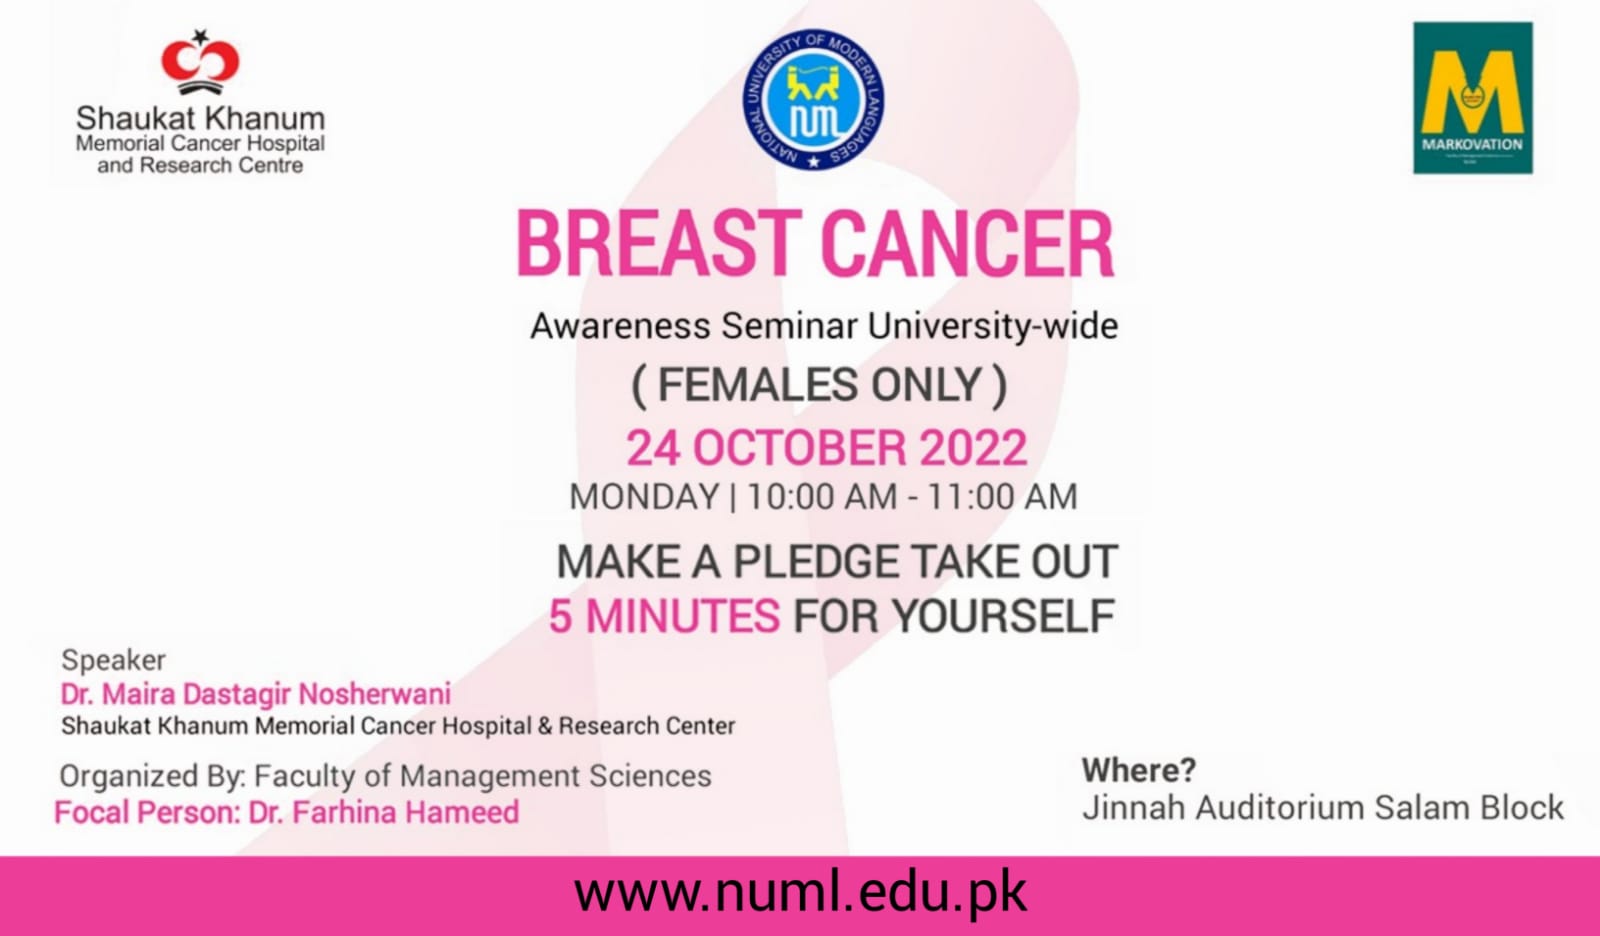 Breast Cancer Awareness Seminar University-wide (Females Only)